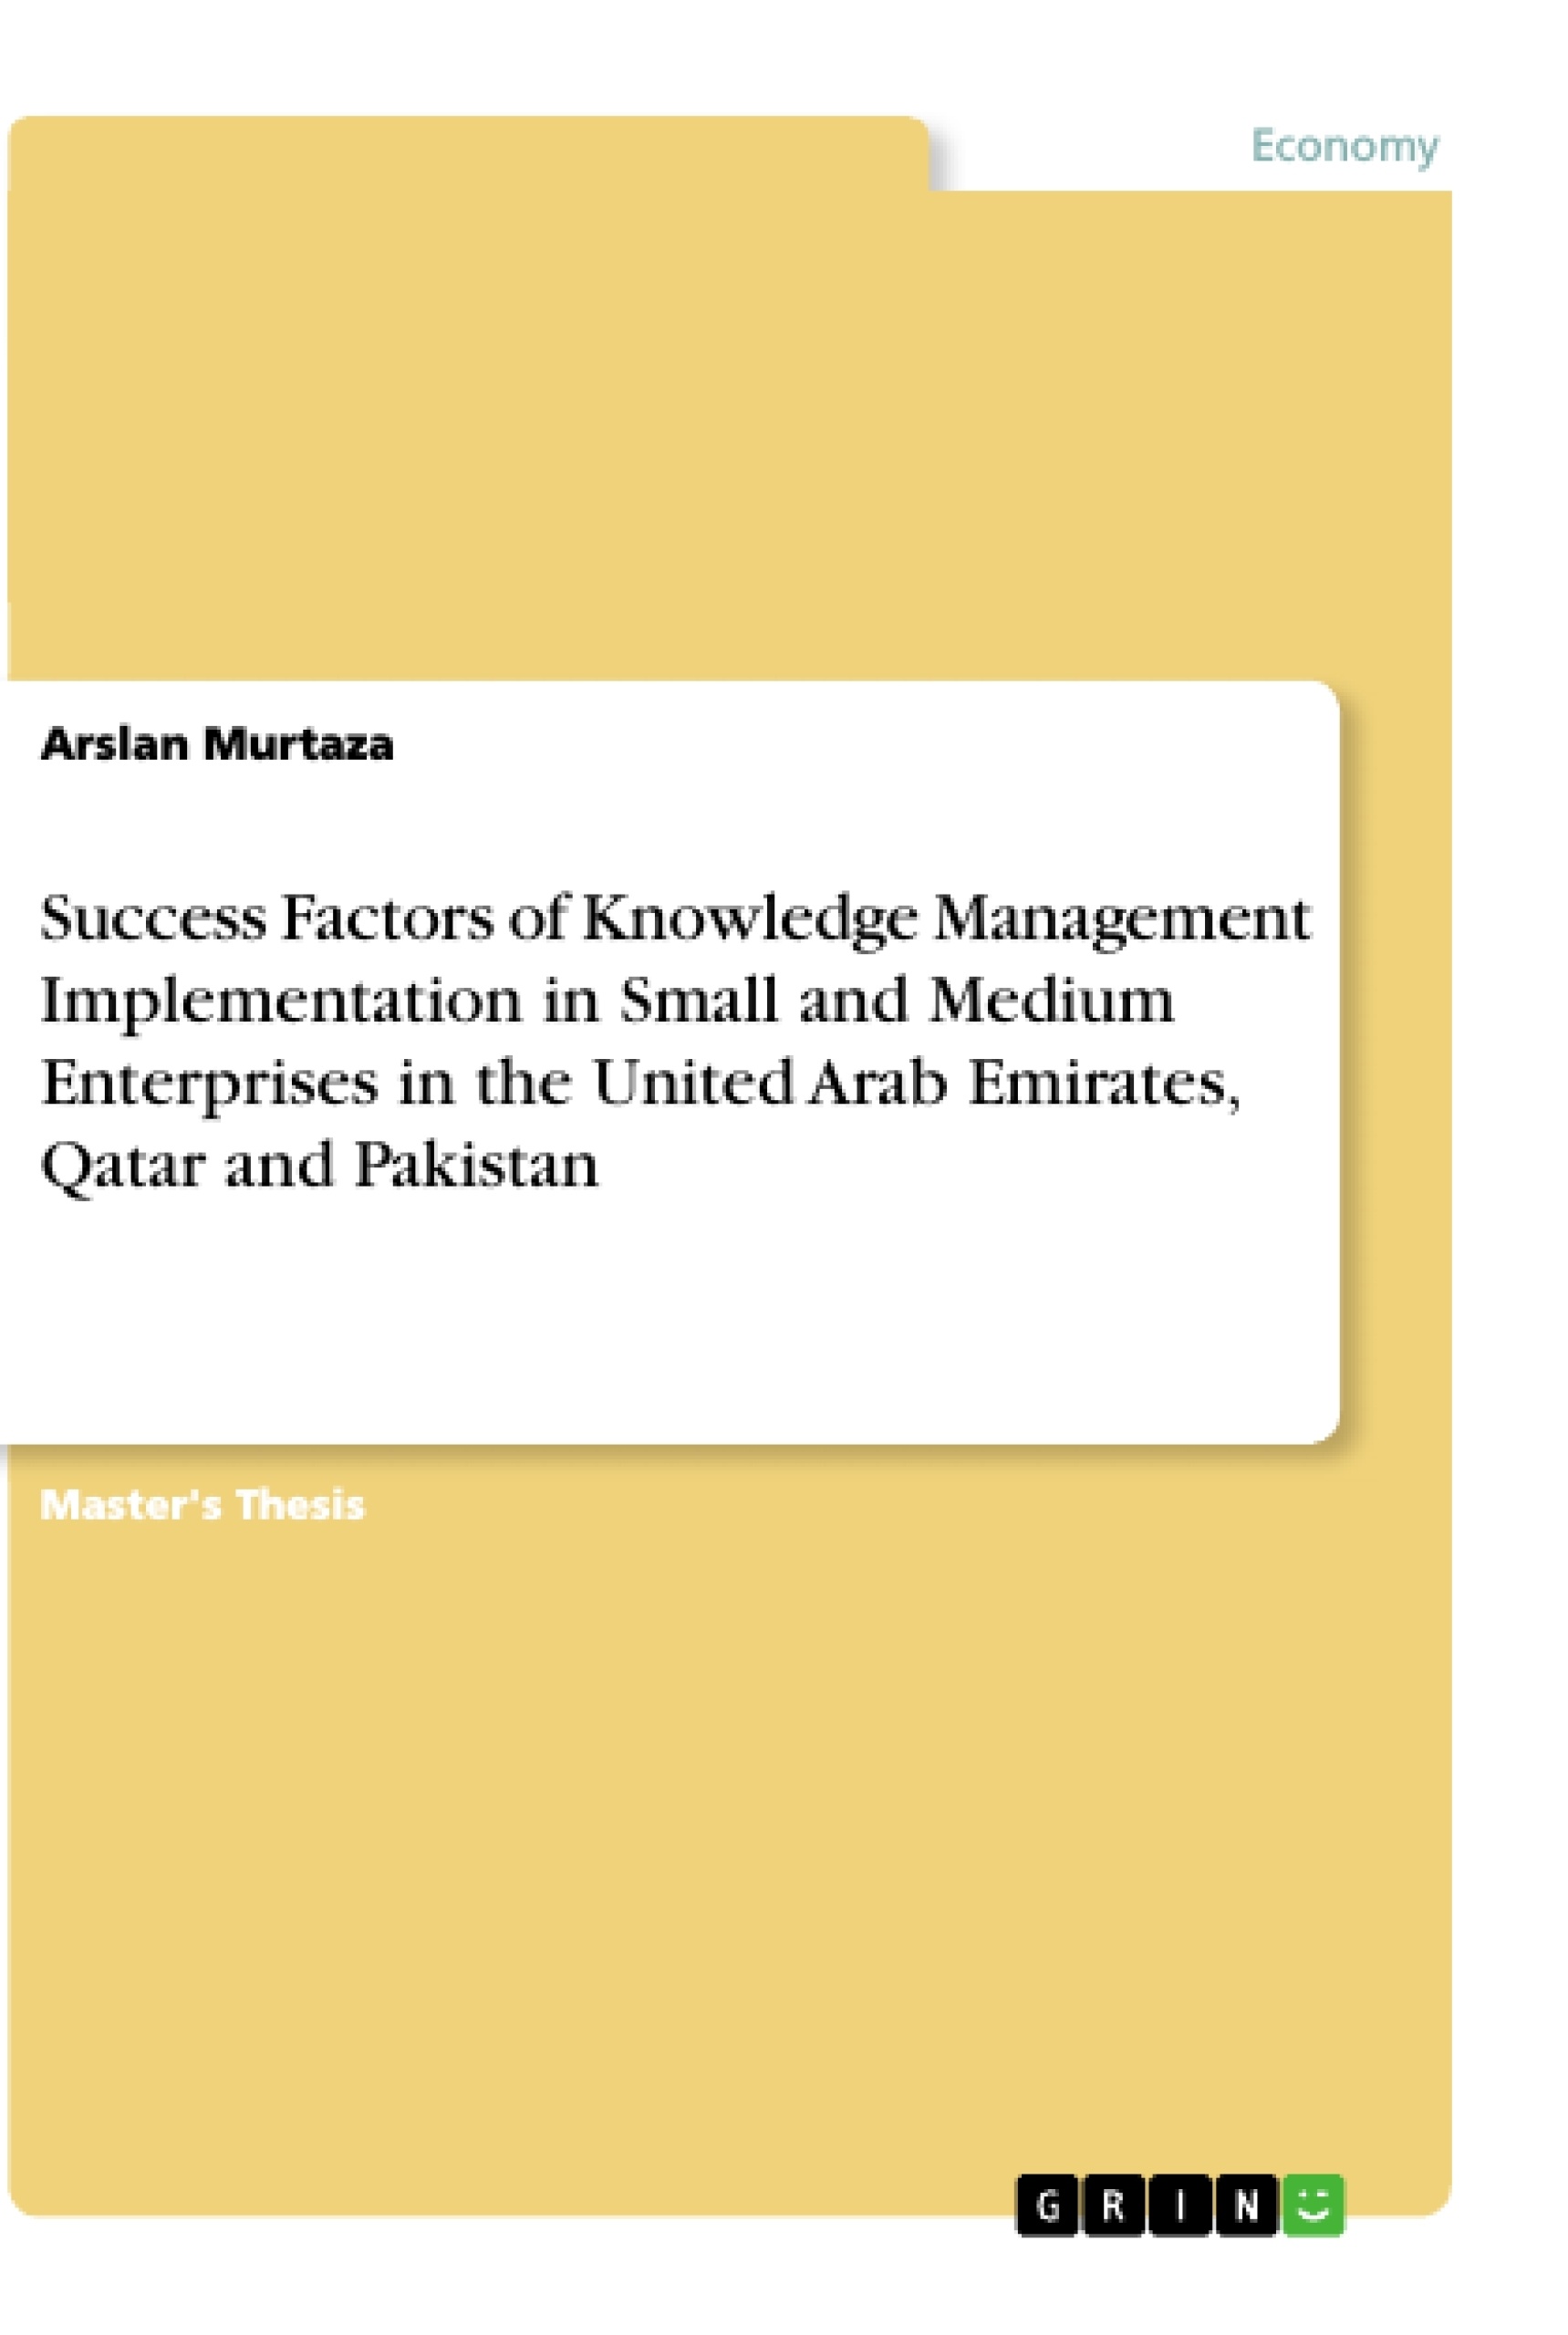 Título: Success Factors of Knowledge Management Implementation in Small and Medium Enterprises in the United Arab Emirates, Qatar and Pakistan